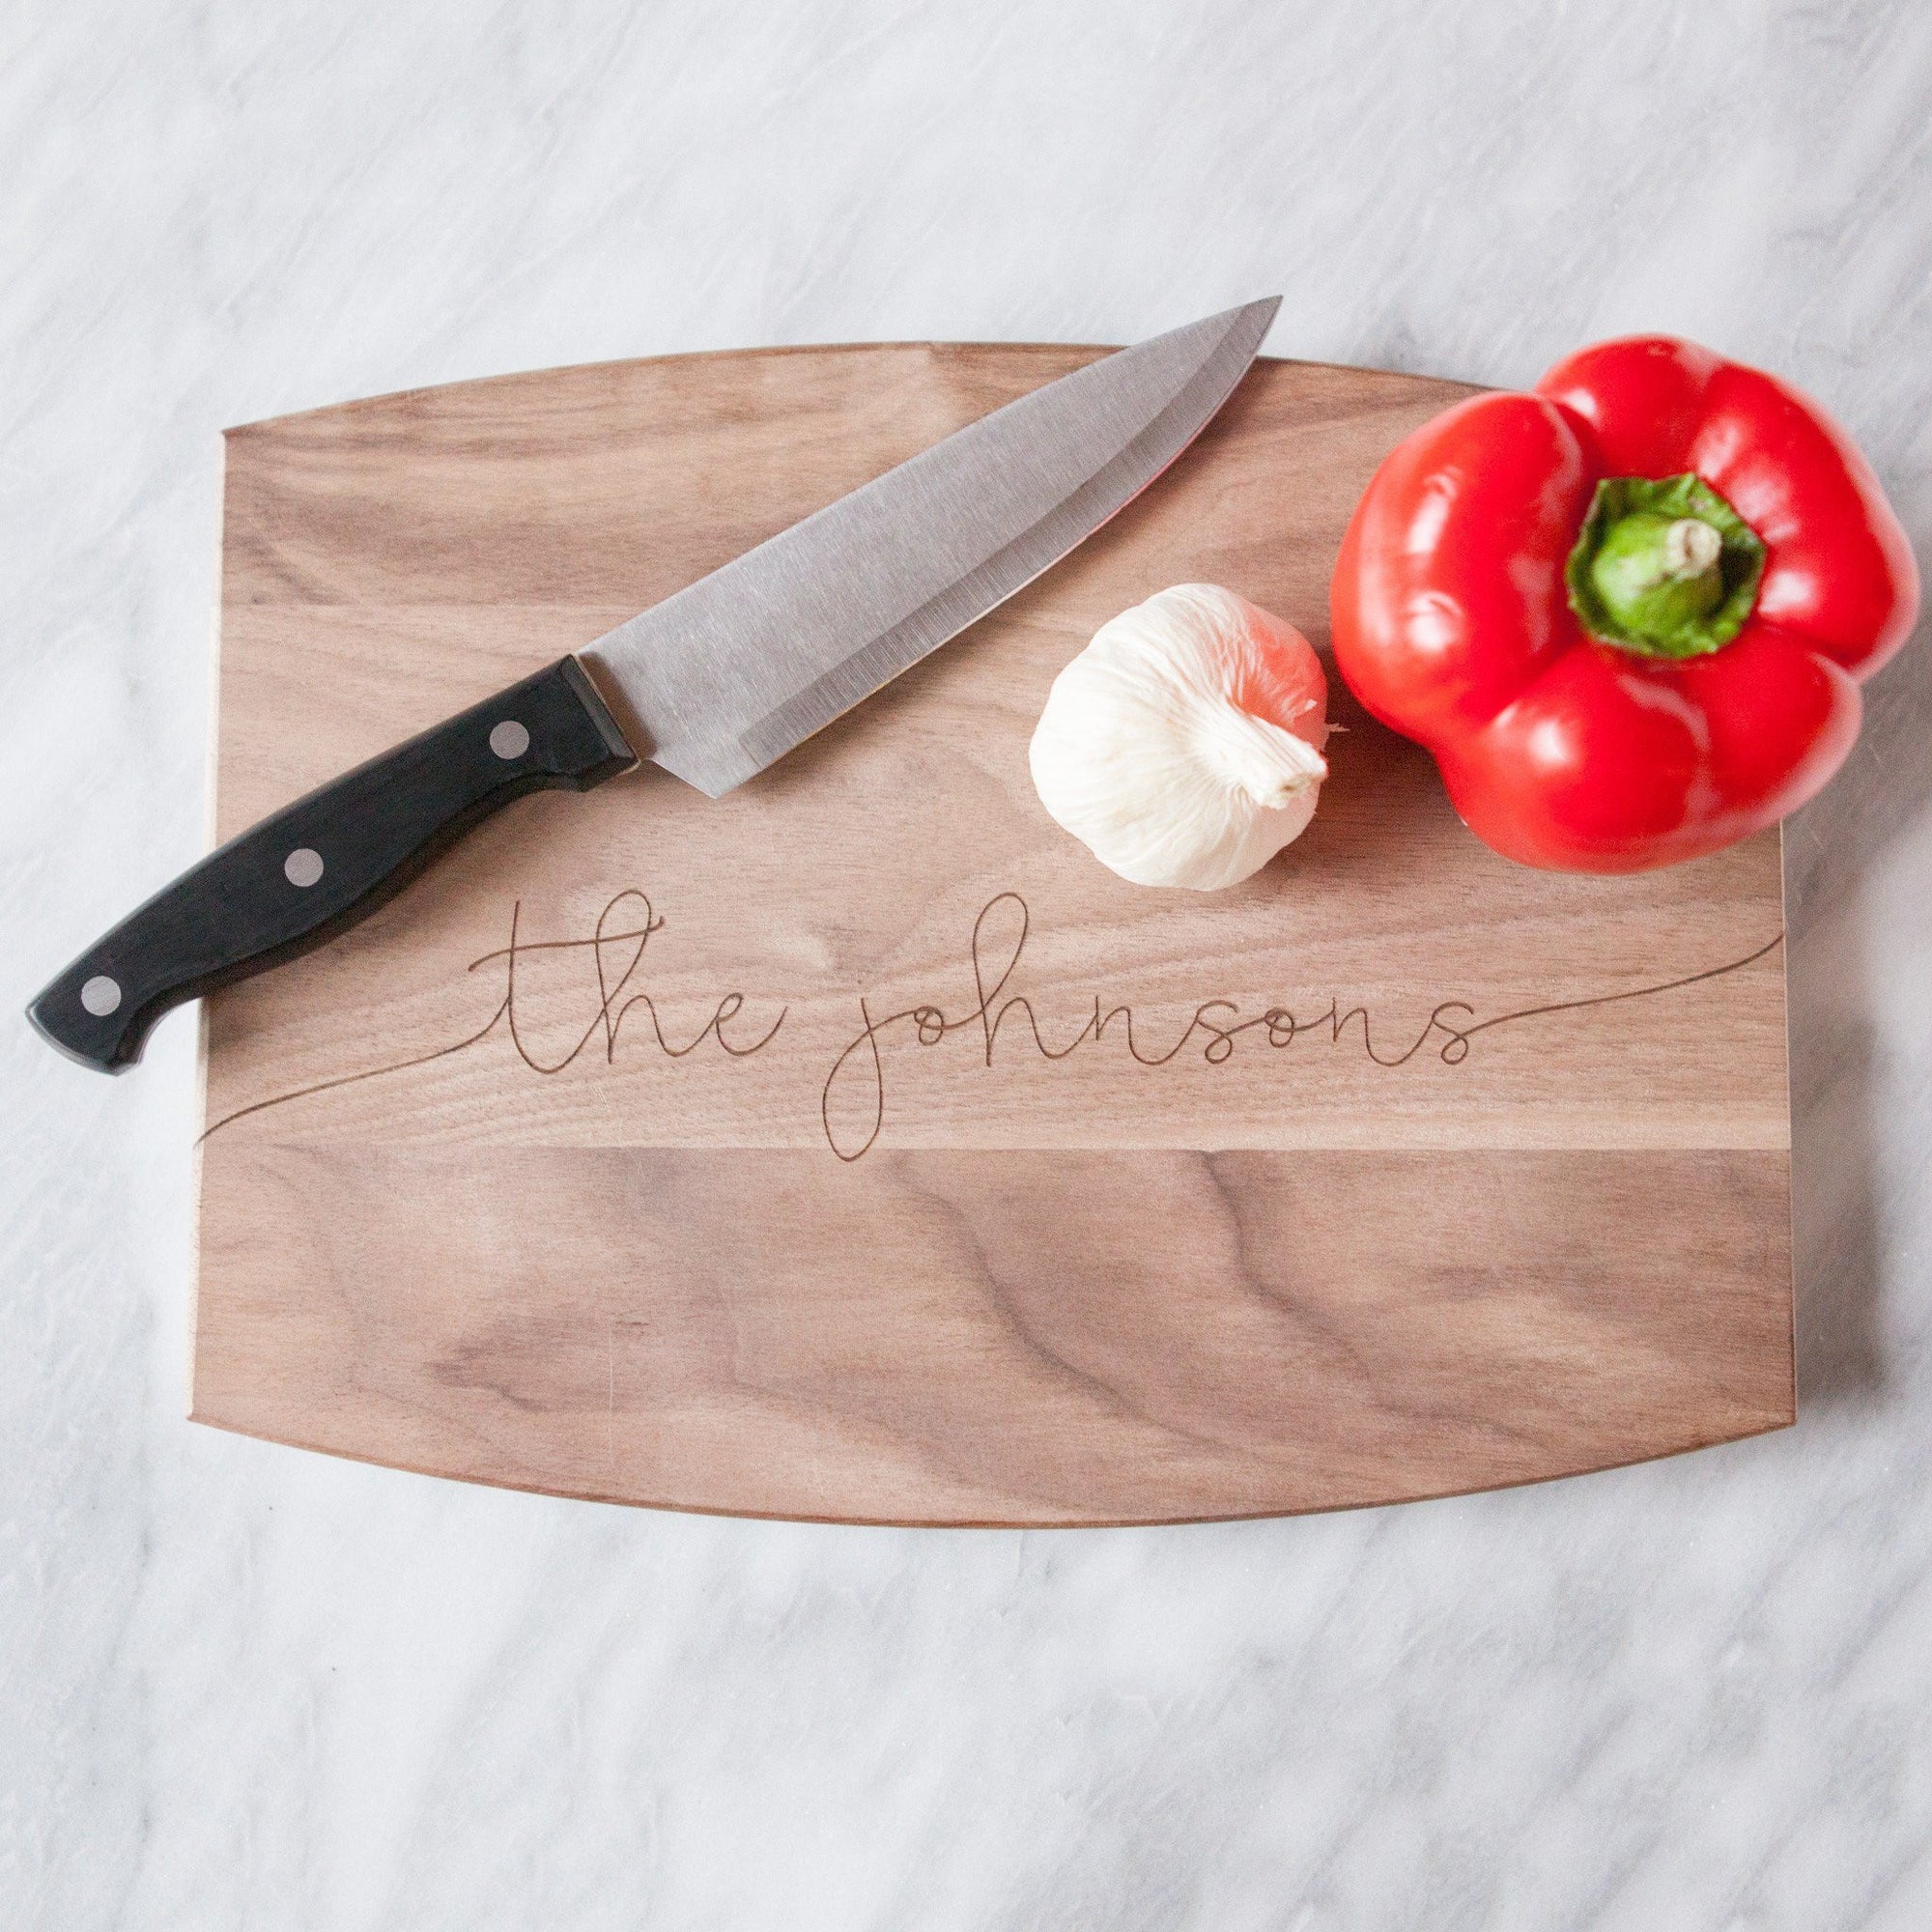 custom cutting board, newlyweds gift, wedding gifts, couples gifts, engraved cutting boards, his and hers gifts